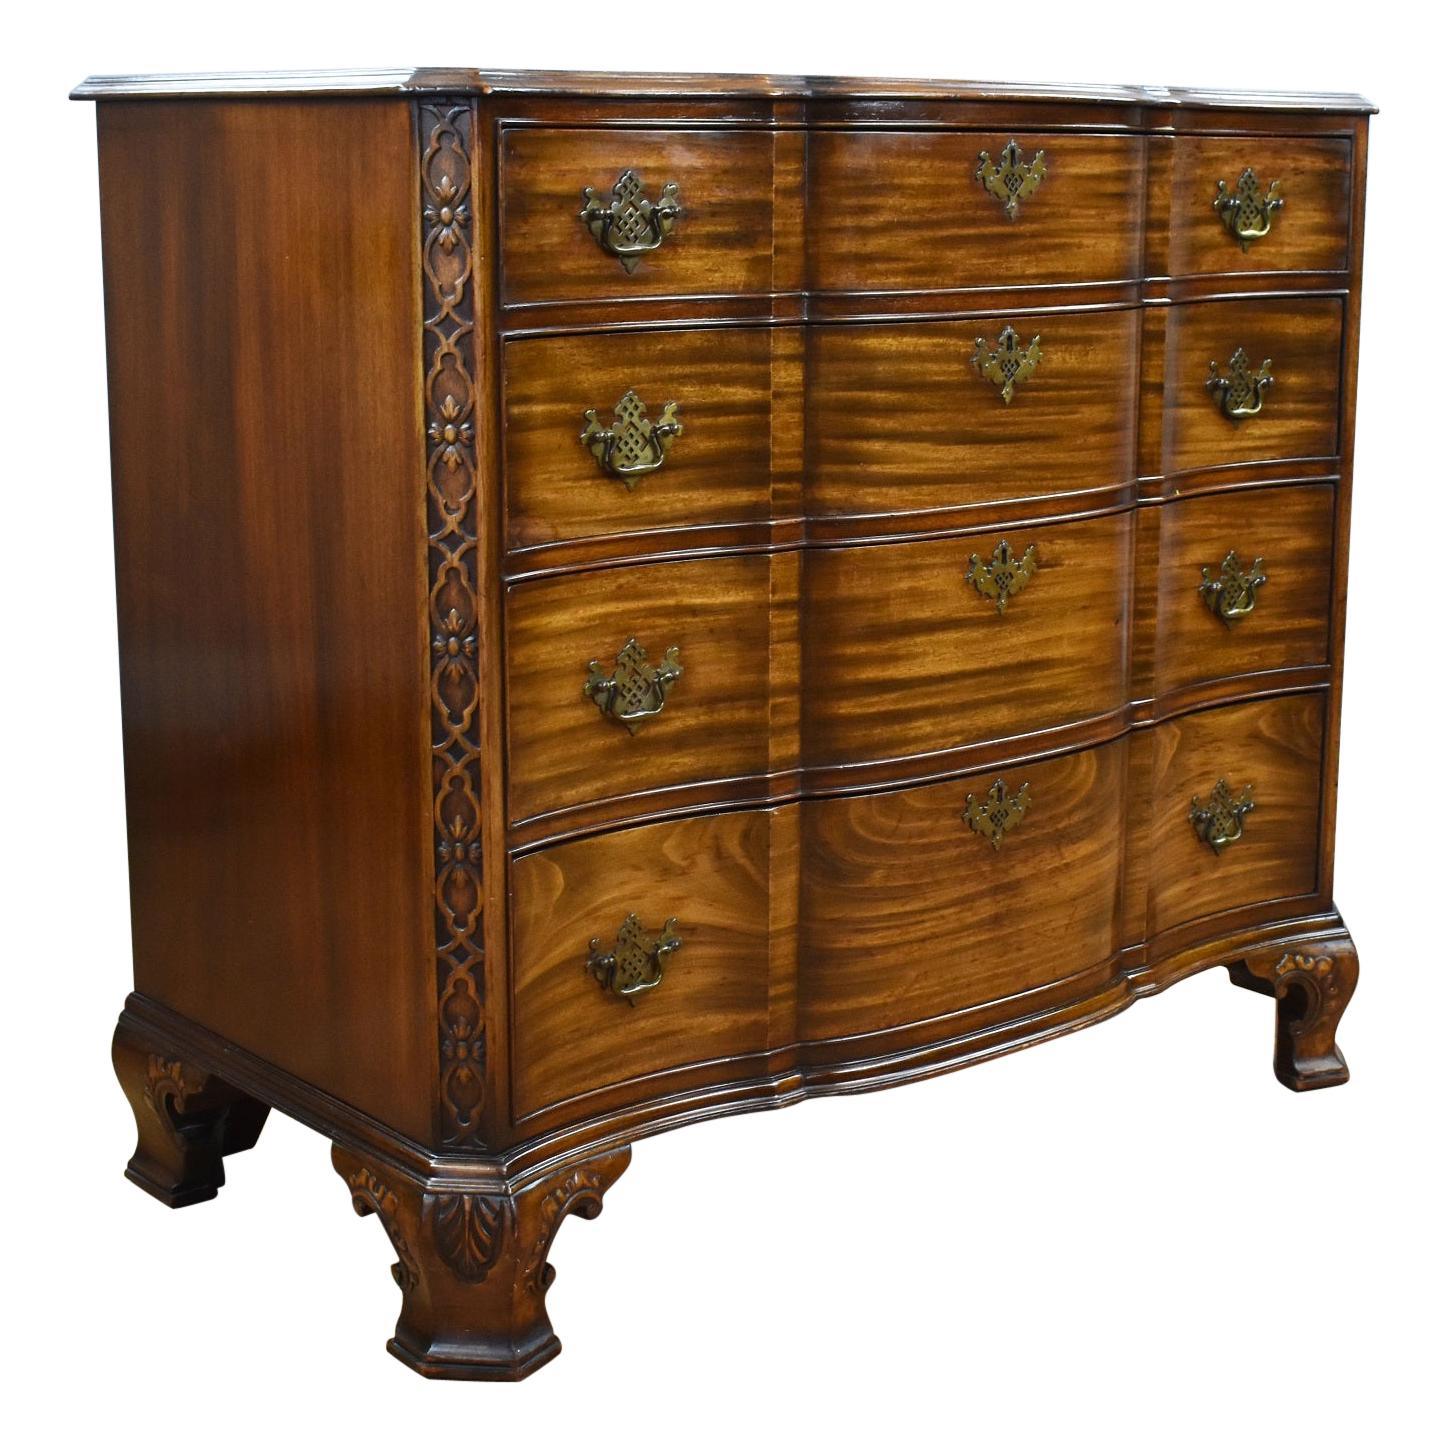 George III Style "Waring and Gillow" Mahogany Serpentine Chest of Drawers For Sale